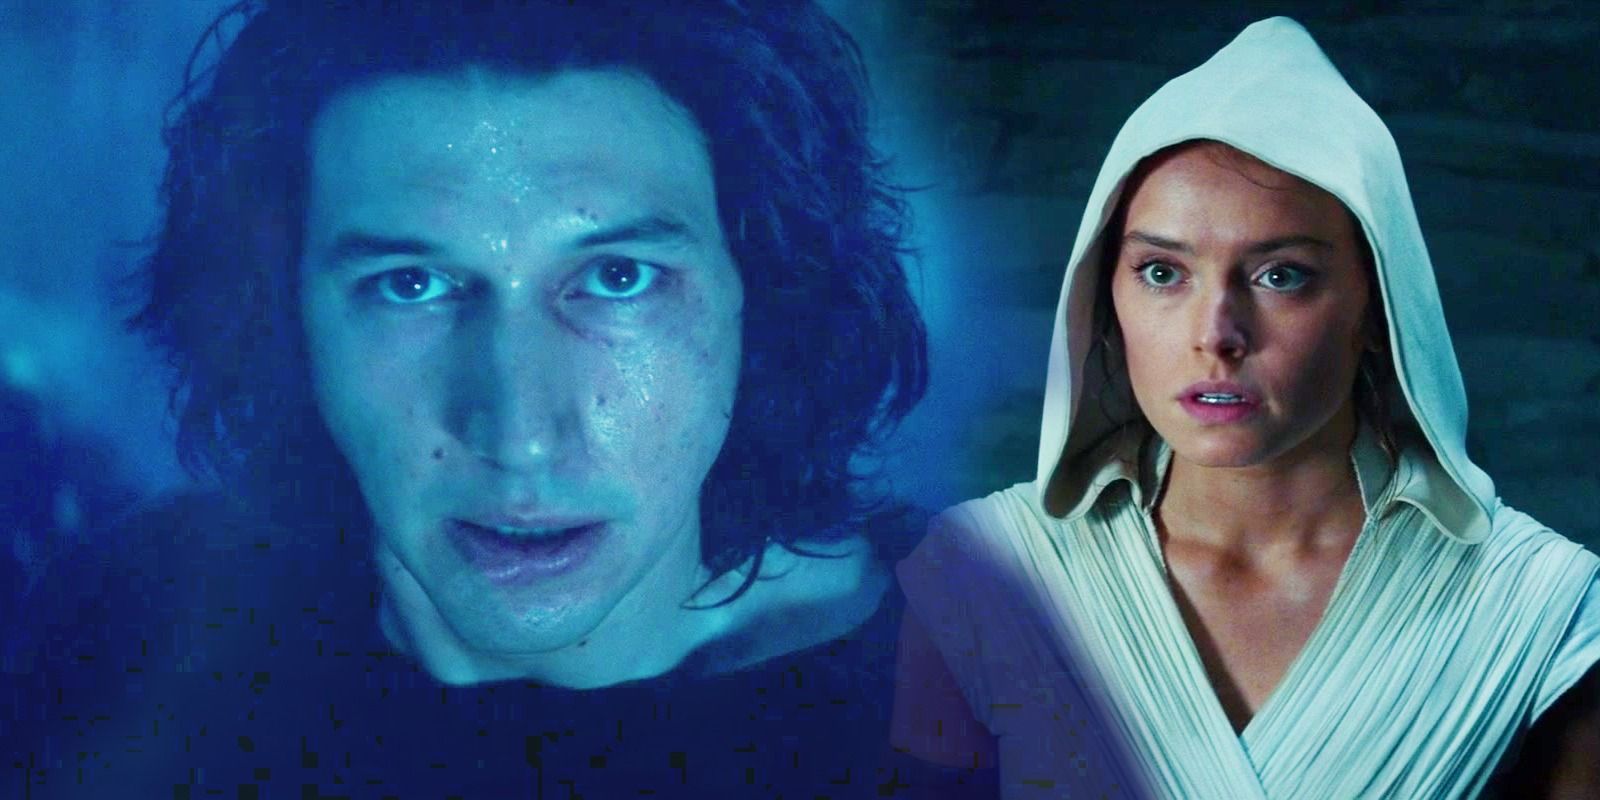 Rey to the right from The Rise of Skywalker looking surprised and Kylo Ren in a blue hue similar to a Force ghost to the left